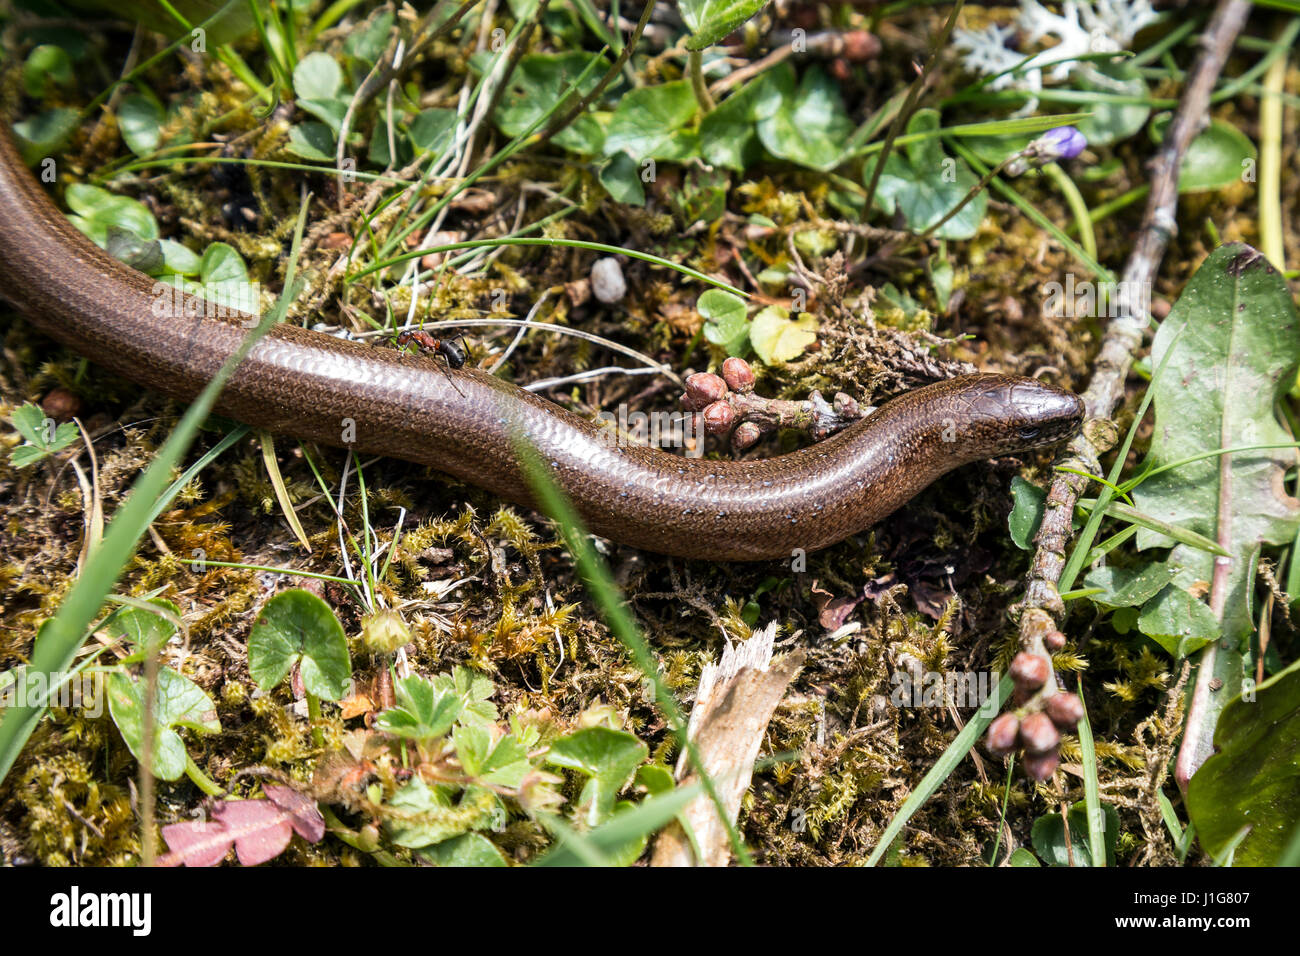 Slow-worm with ant in woodland setting, Anguis fragilis,The Anguis fragilis, or slow worm, is a limbless lizard native to Eurasia. blindworm.legless Stock Photo